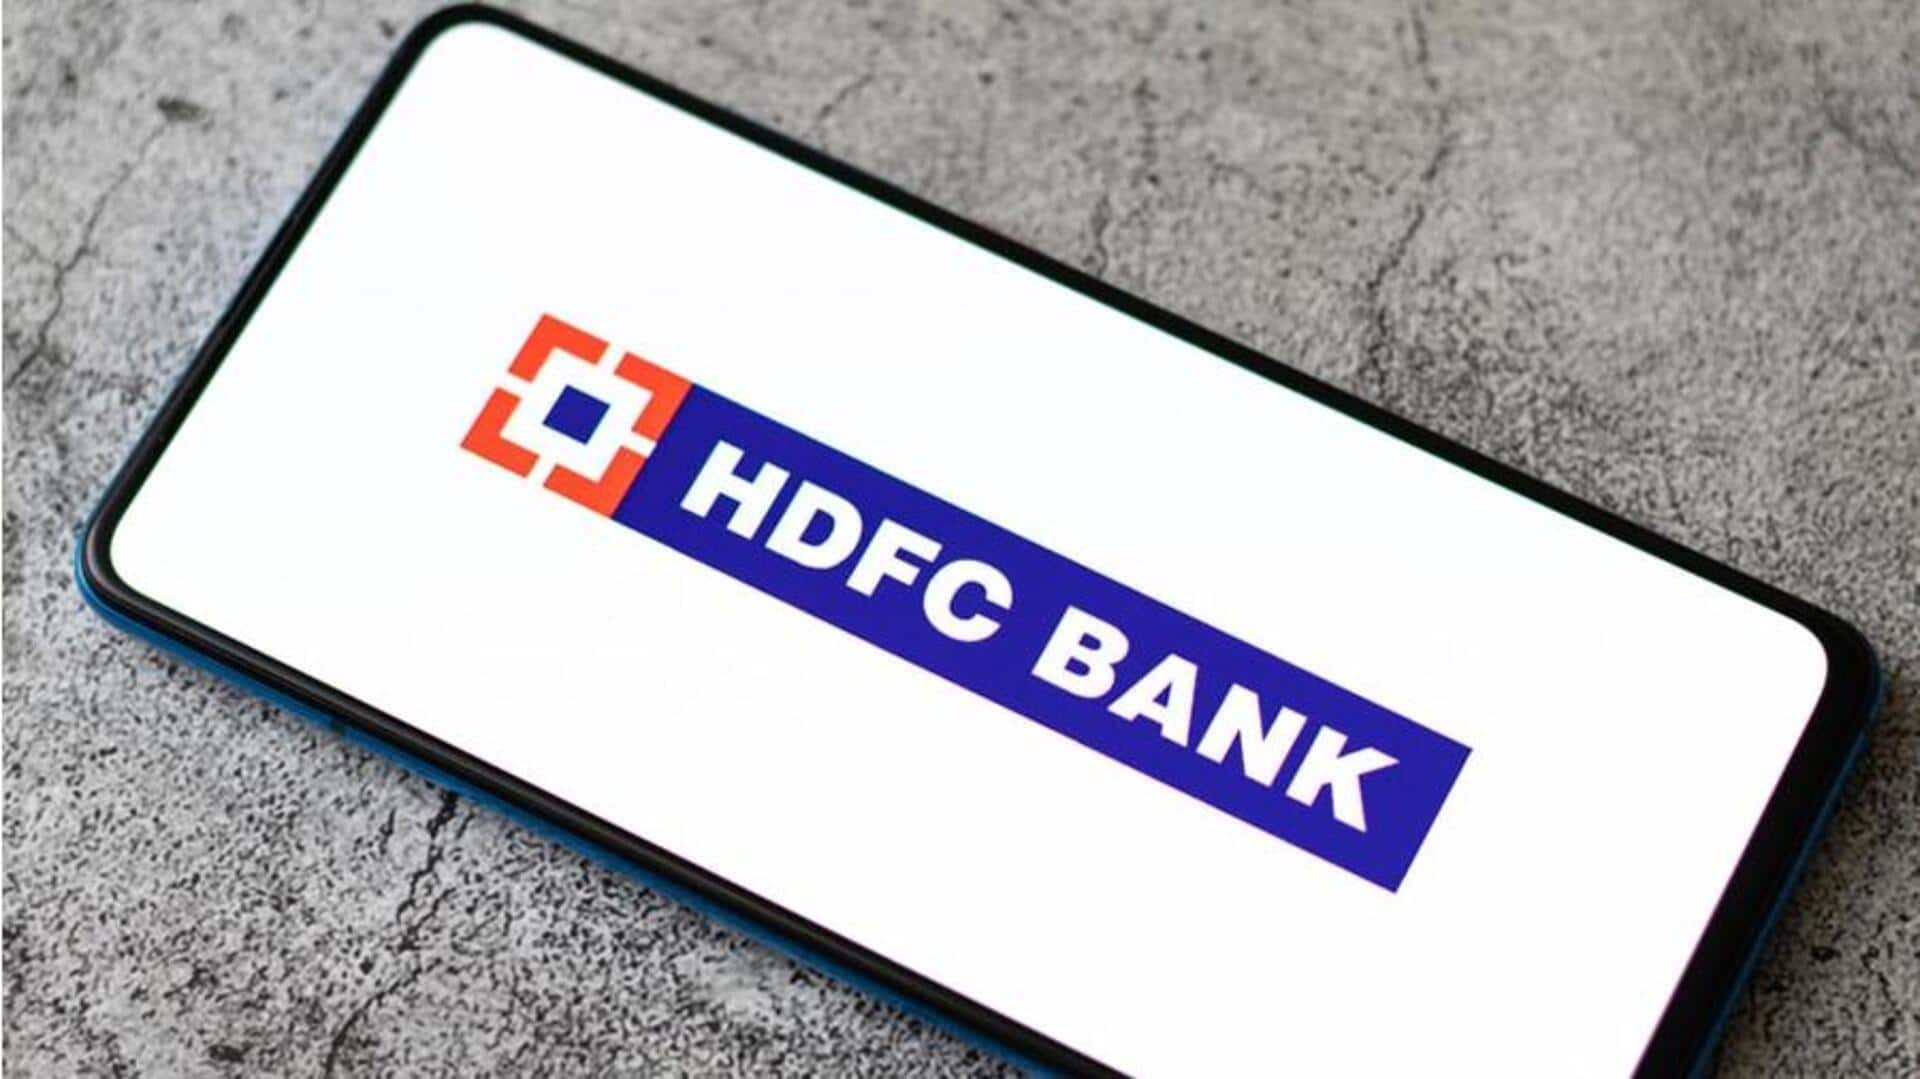 HDFC Bank to divest entire stake in education subsidiary